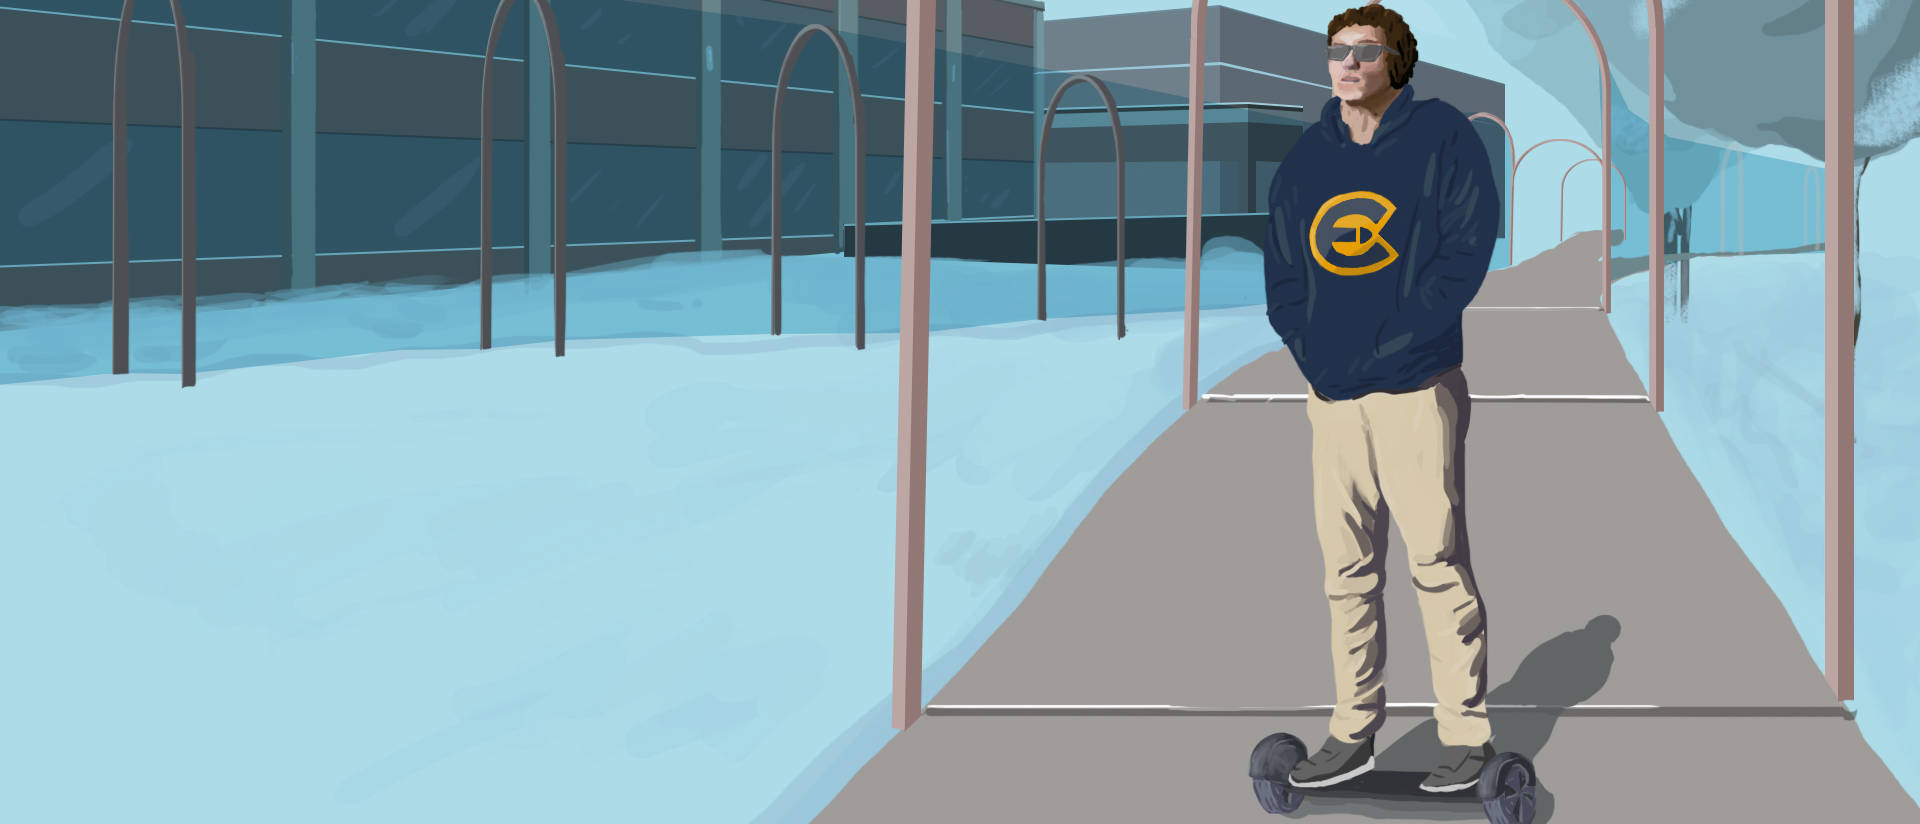 Drawing of UWEC student on hoverboard